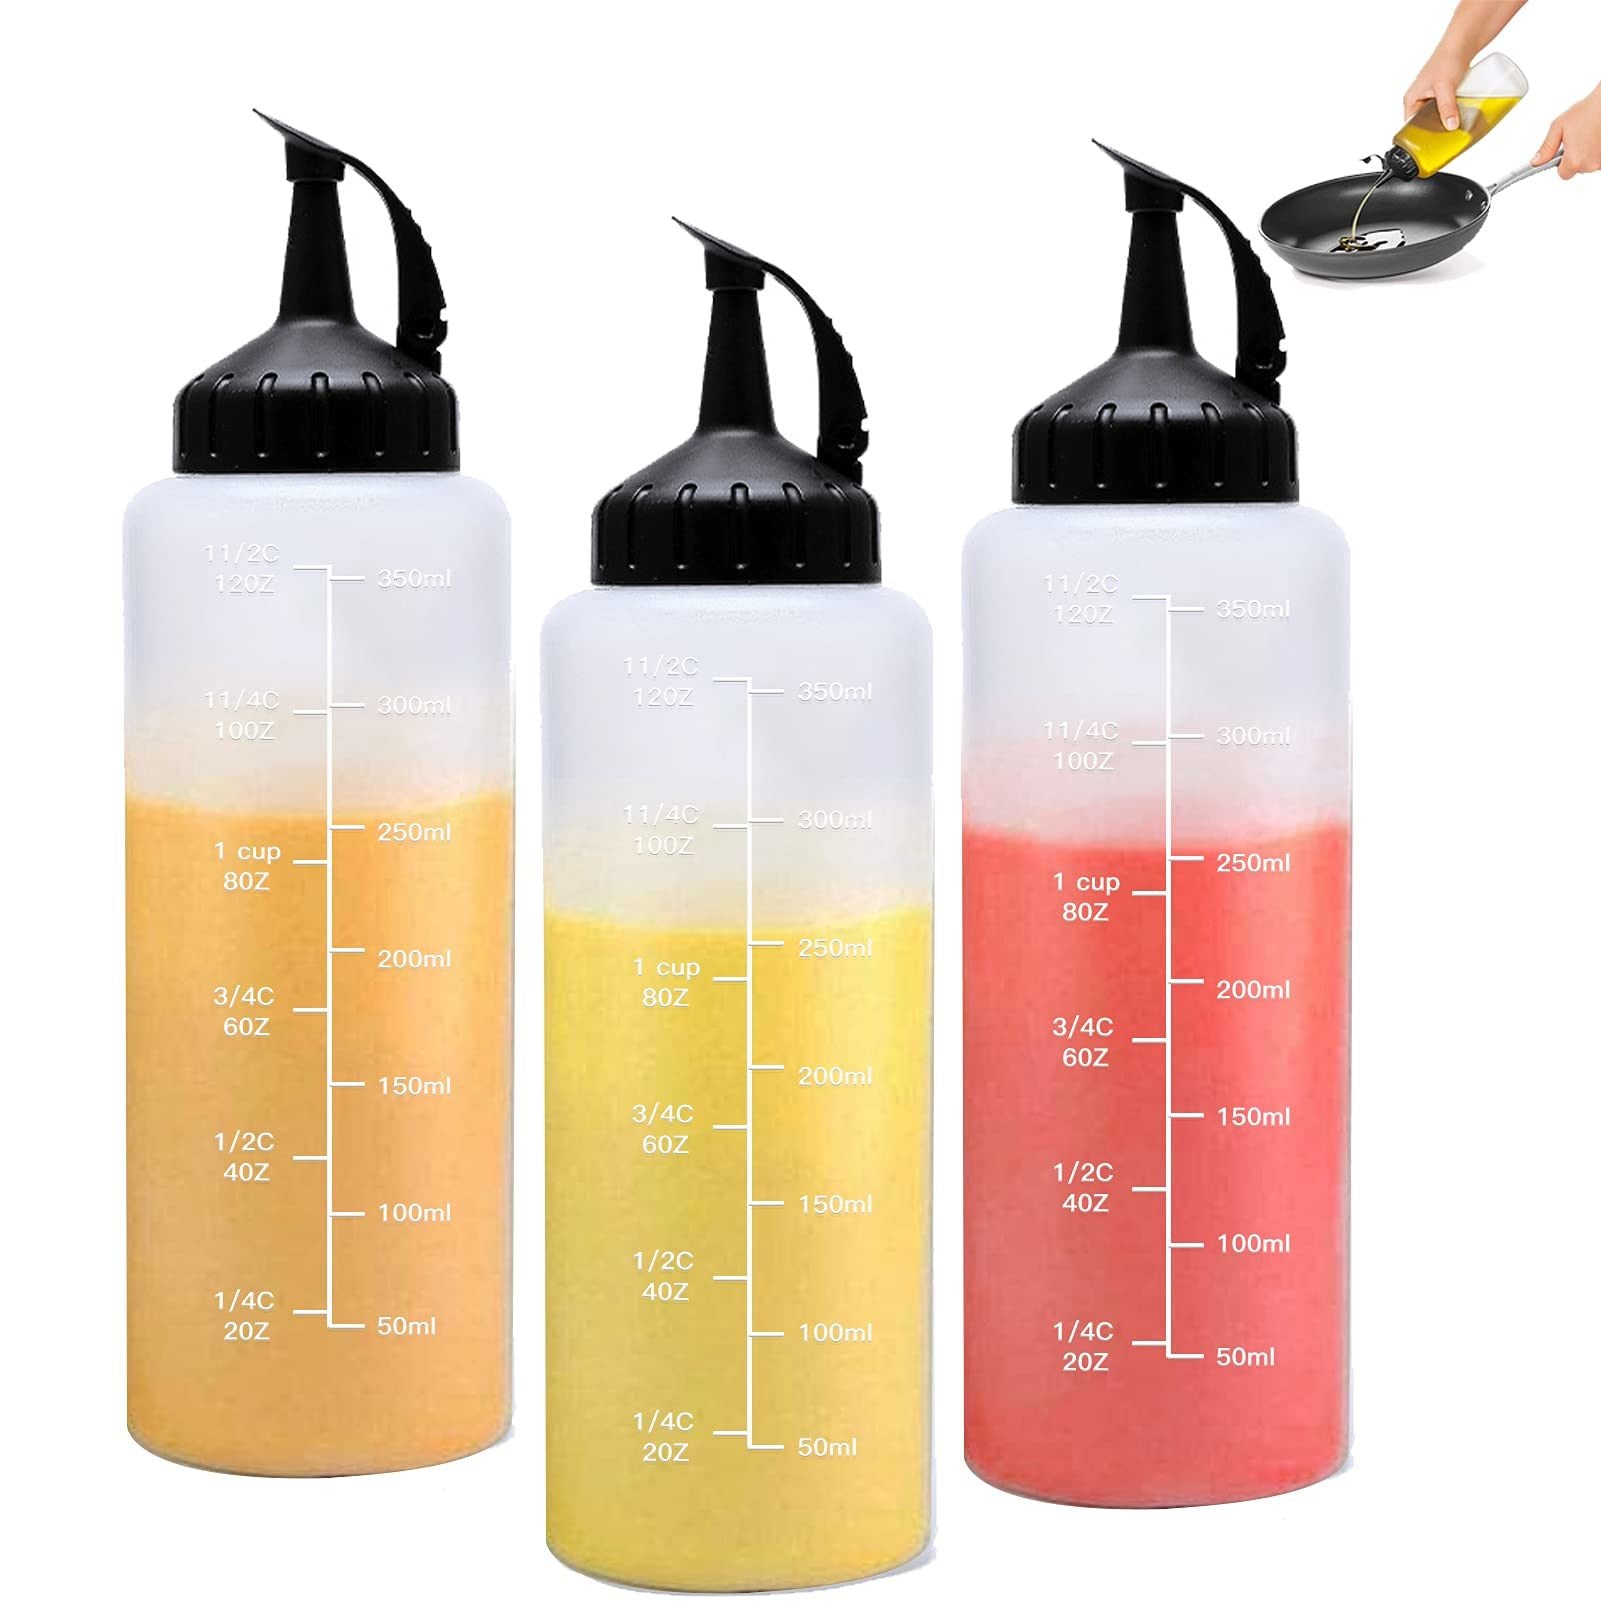 Three 3Pcs Plastic Squeeze Condiment Bottles 12oz with measurement markings, filled with vibrant orange, yellow, and pink liquids. A hand is shown pressing one bottle's dispenser.